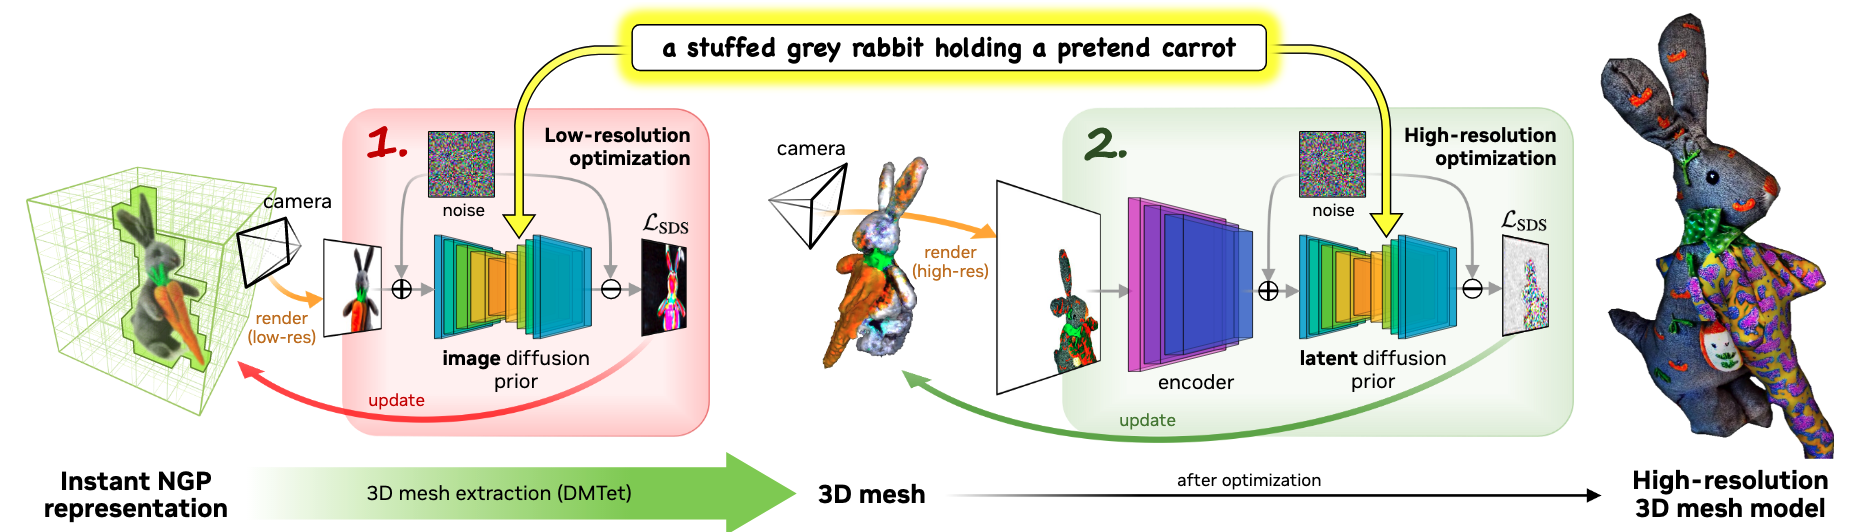 Fig 2. Overview of Magic3D. We generate high-resolution 3D content from input text cues in a coarse-to-fine fashion.  In the first stage, we exploit the low-resolution diffusion prior and optimize the neural field representation (color, density and normal field) to obtain a coarse model.  We further differentially extract textured 3D meshes from the density and color fields of the coarse model.  We then fine-tune it with a high-resolution latent diffusion model.  After optimization, our model generates high-quality 3D meshes with detailed textures.